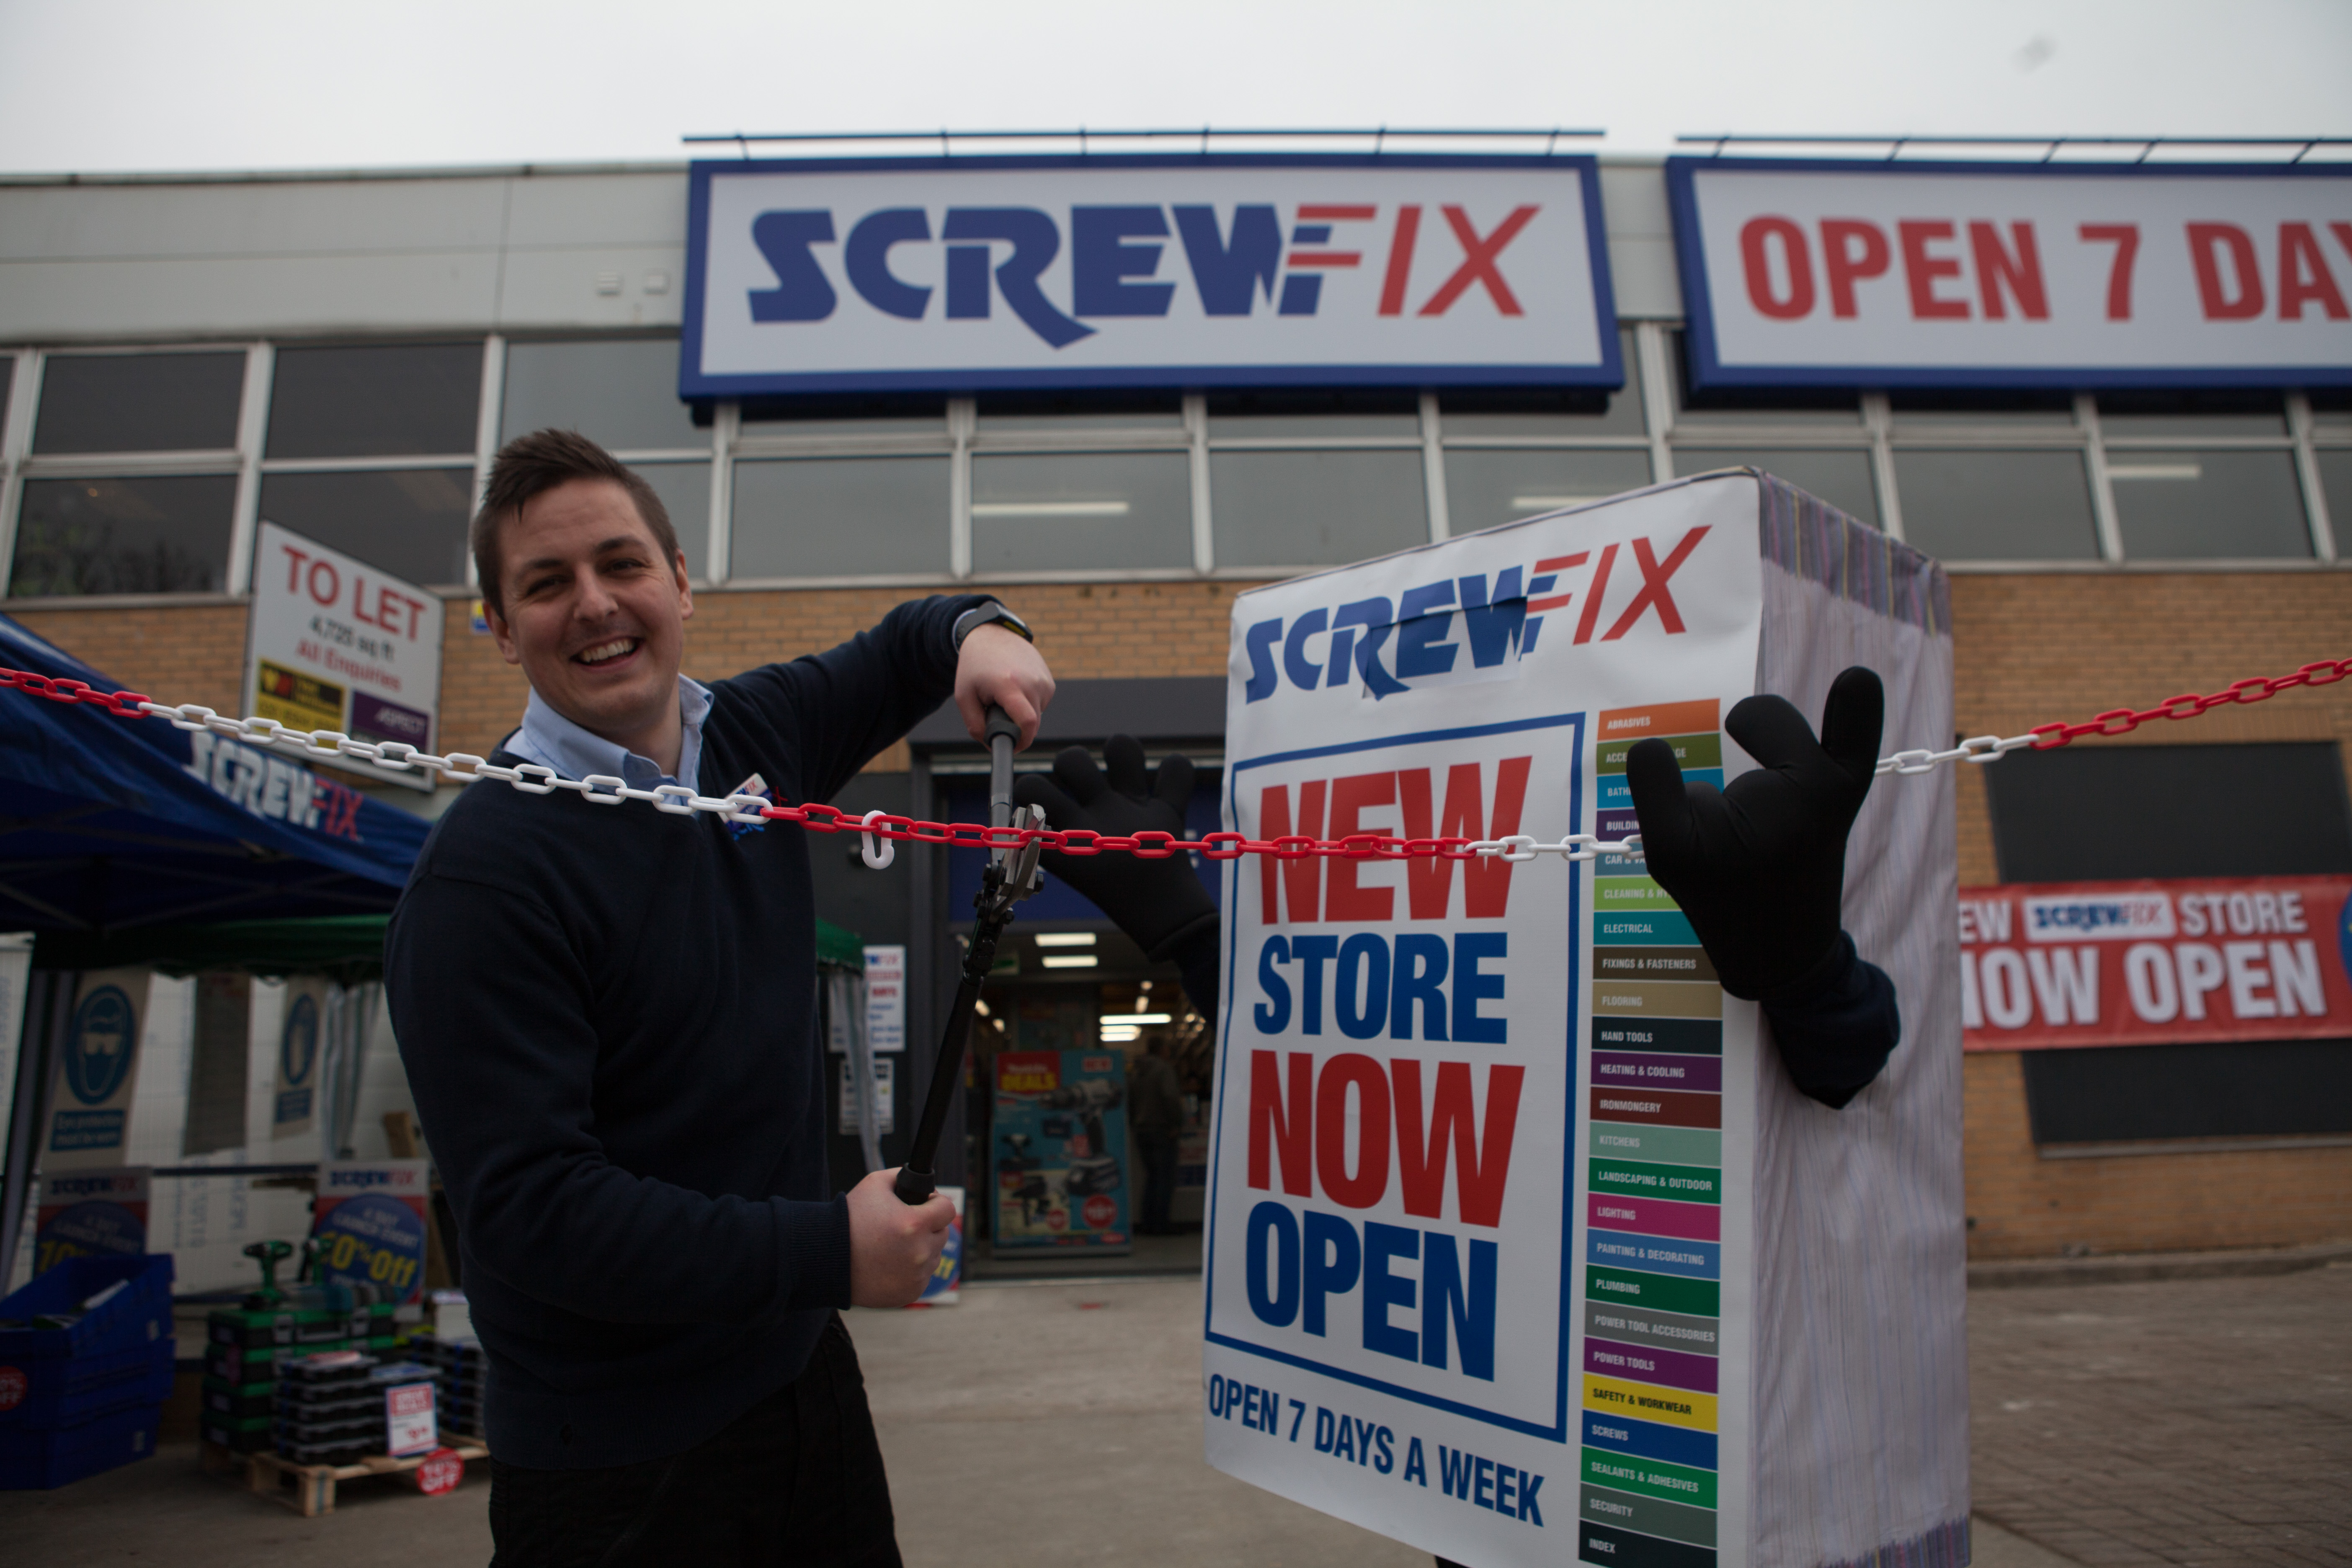 Sunbury on Thames’ first Screwfix store is declared a runaway success